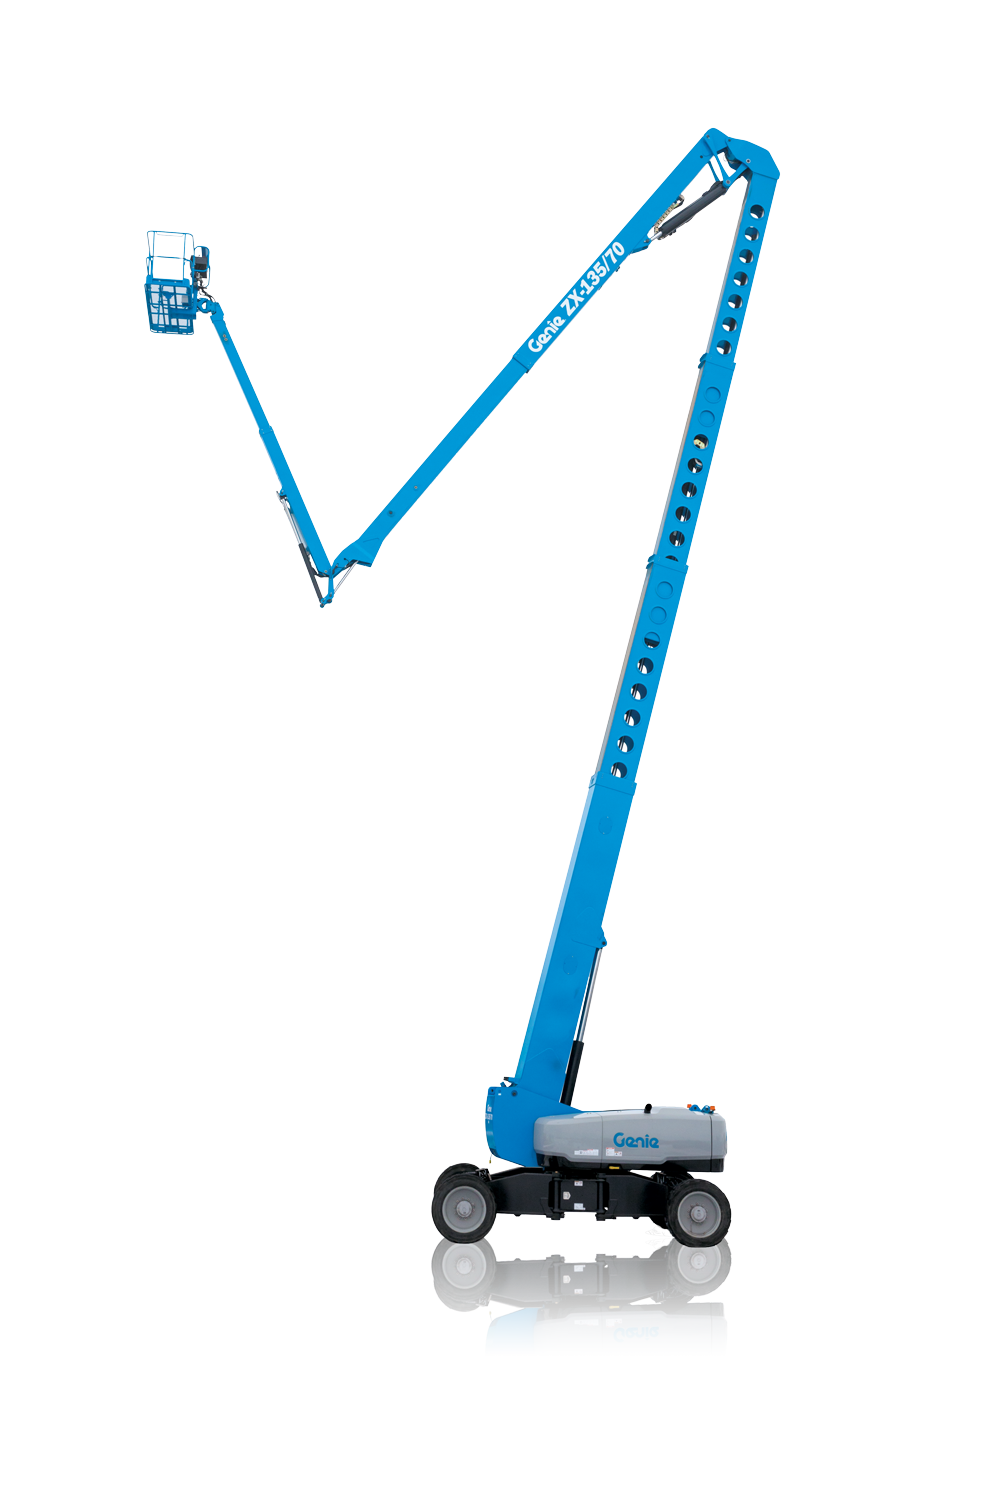 Genie® ZX-135/70 | Articulated Boom Lifts for glass installation work